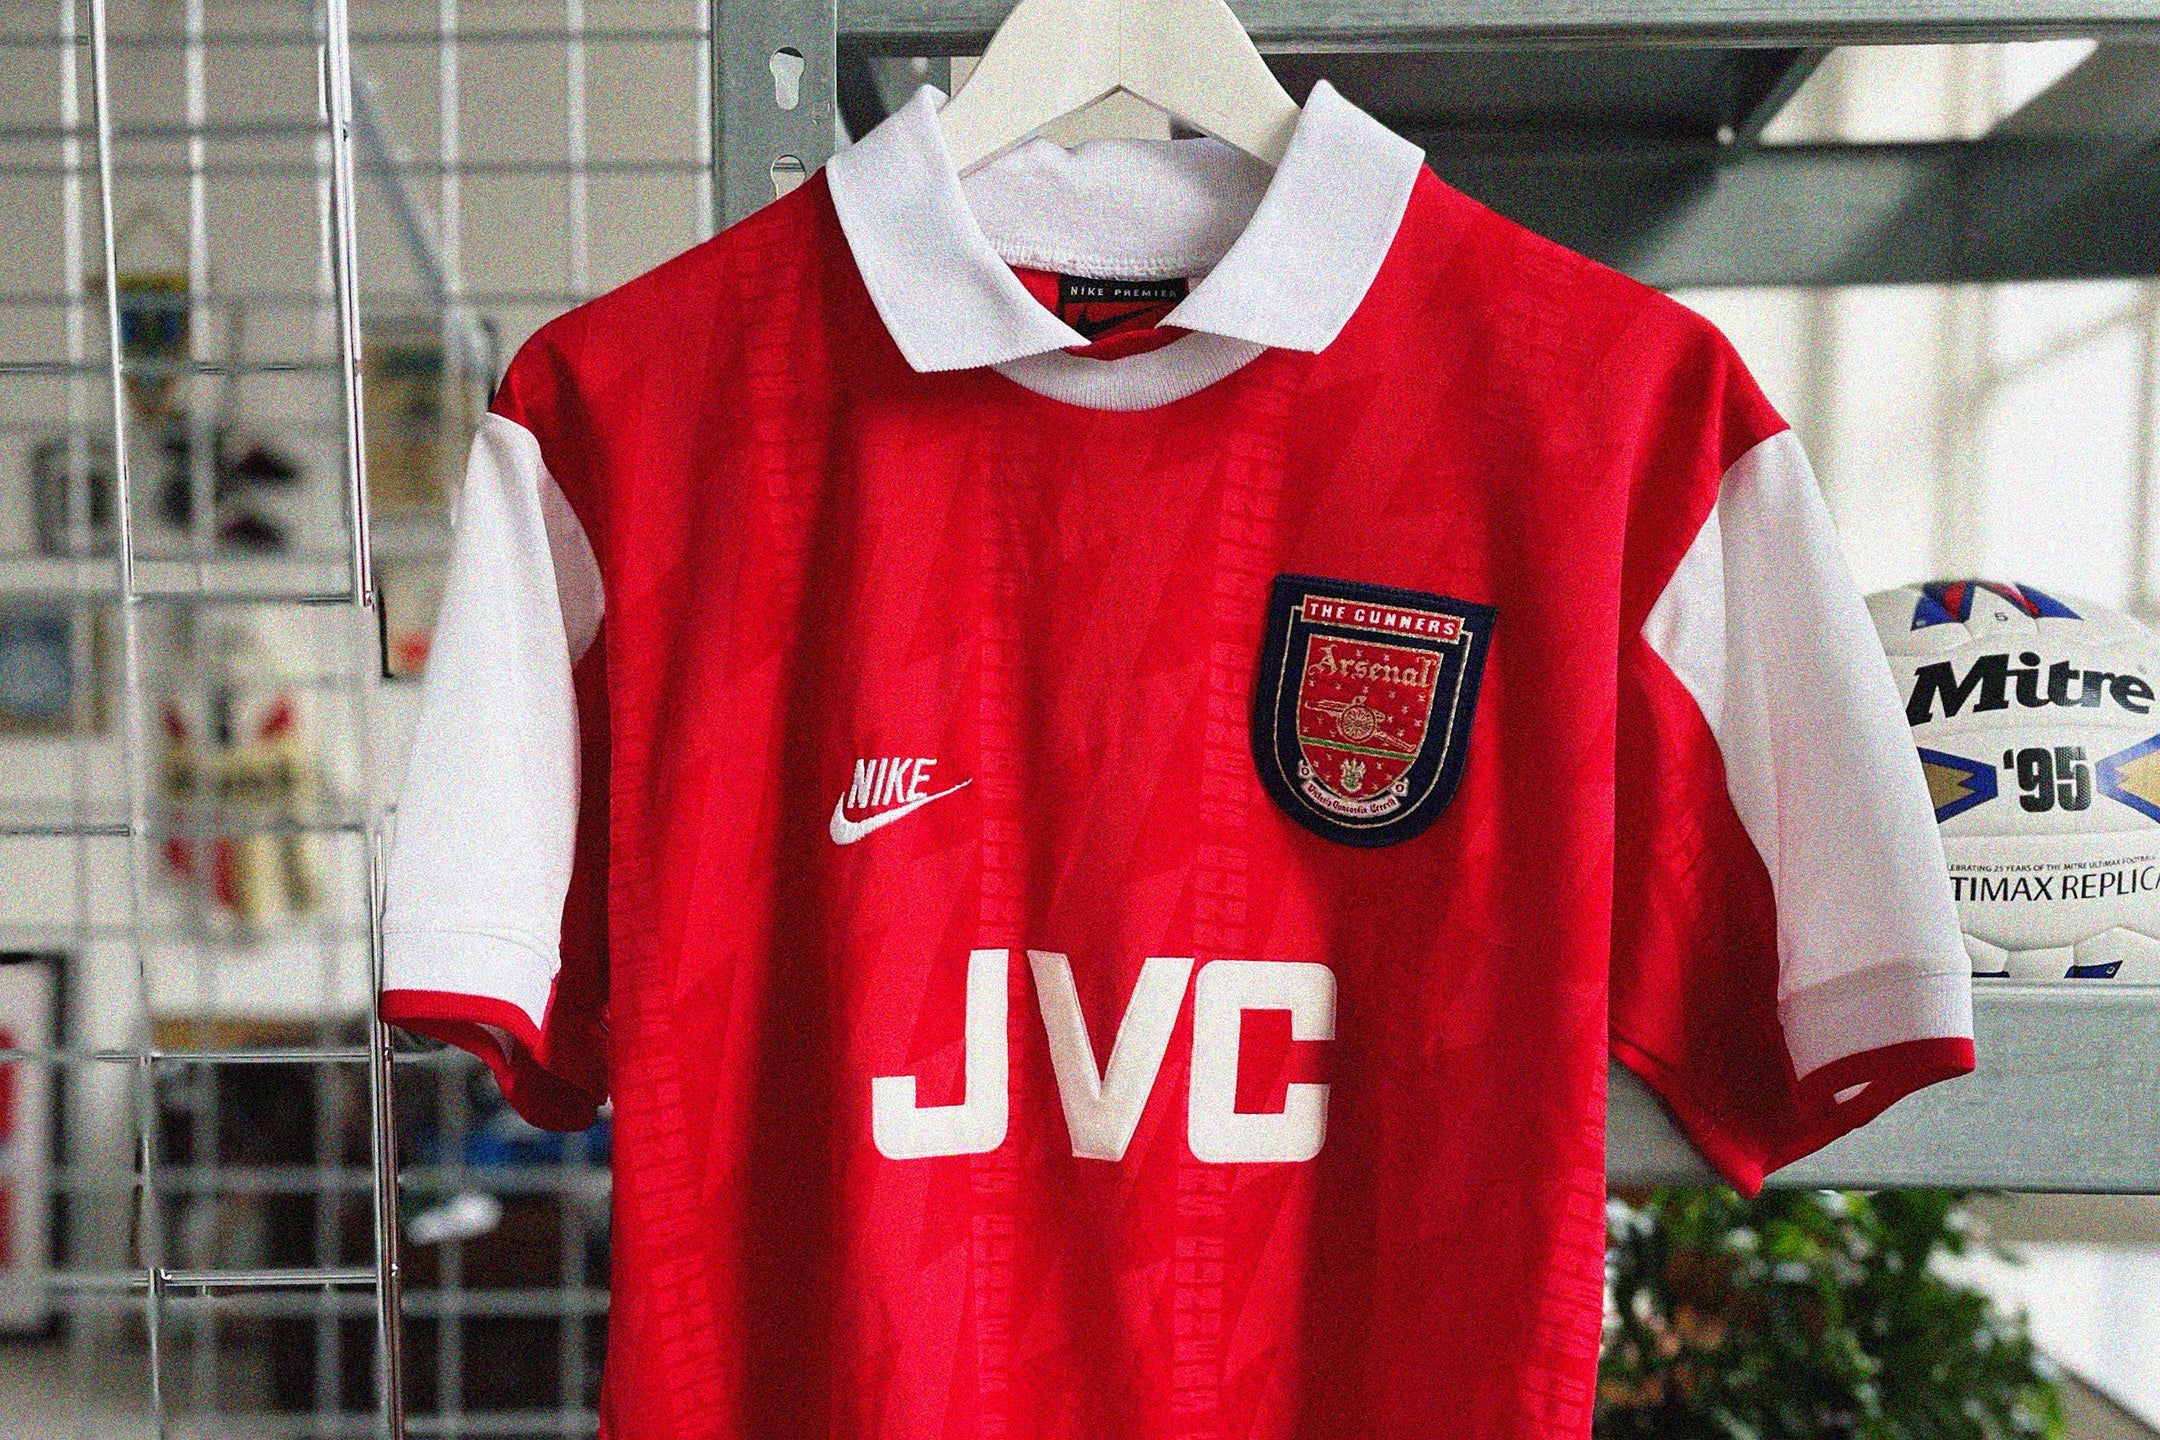 The world's biggest vintage football shirt collection is coming to